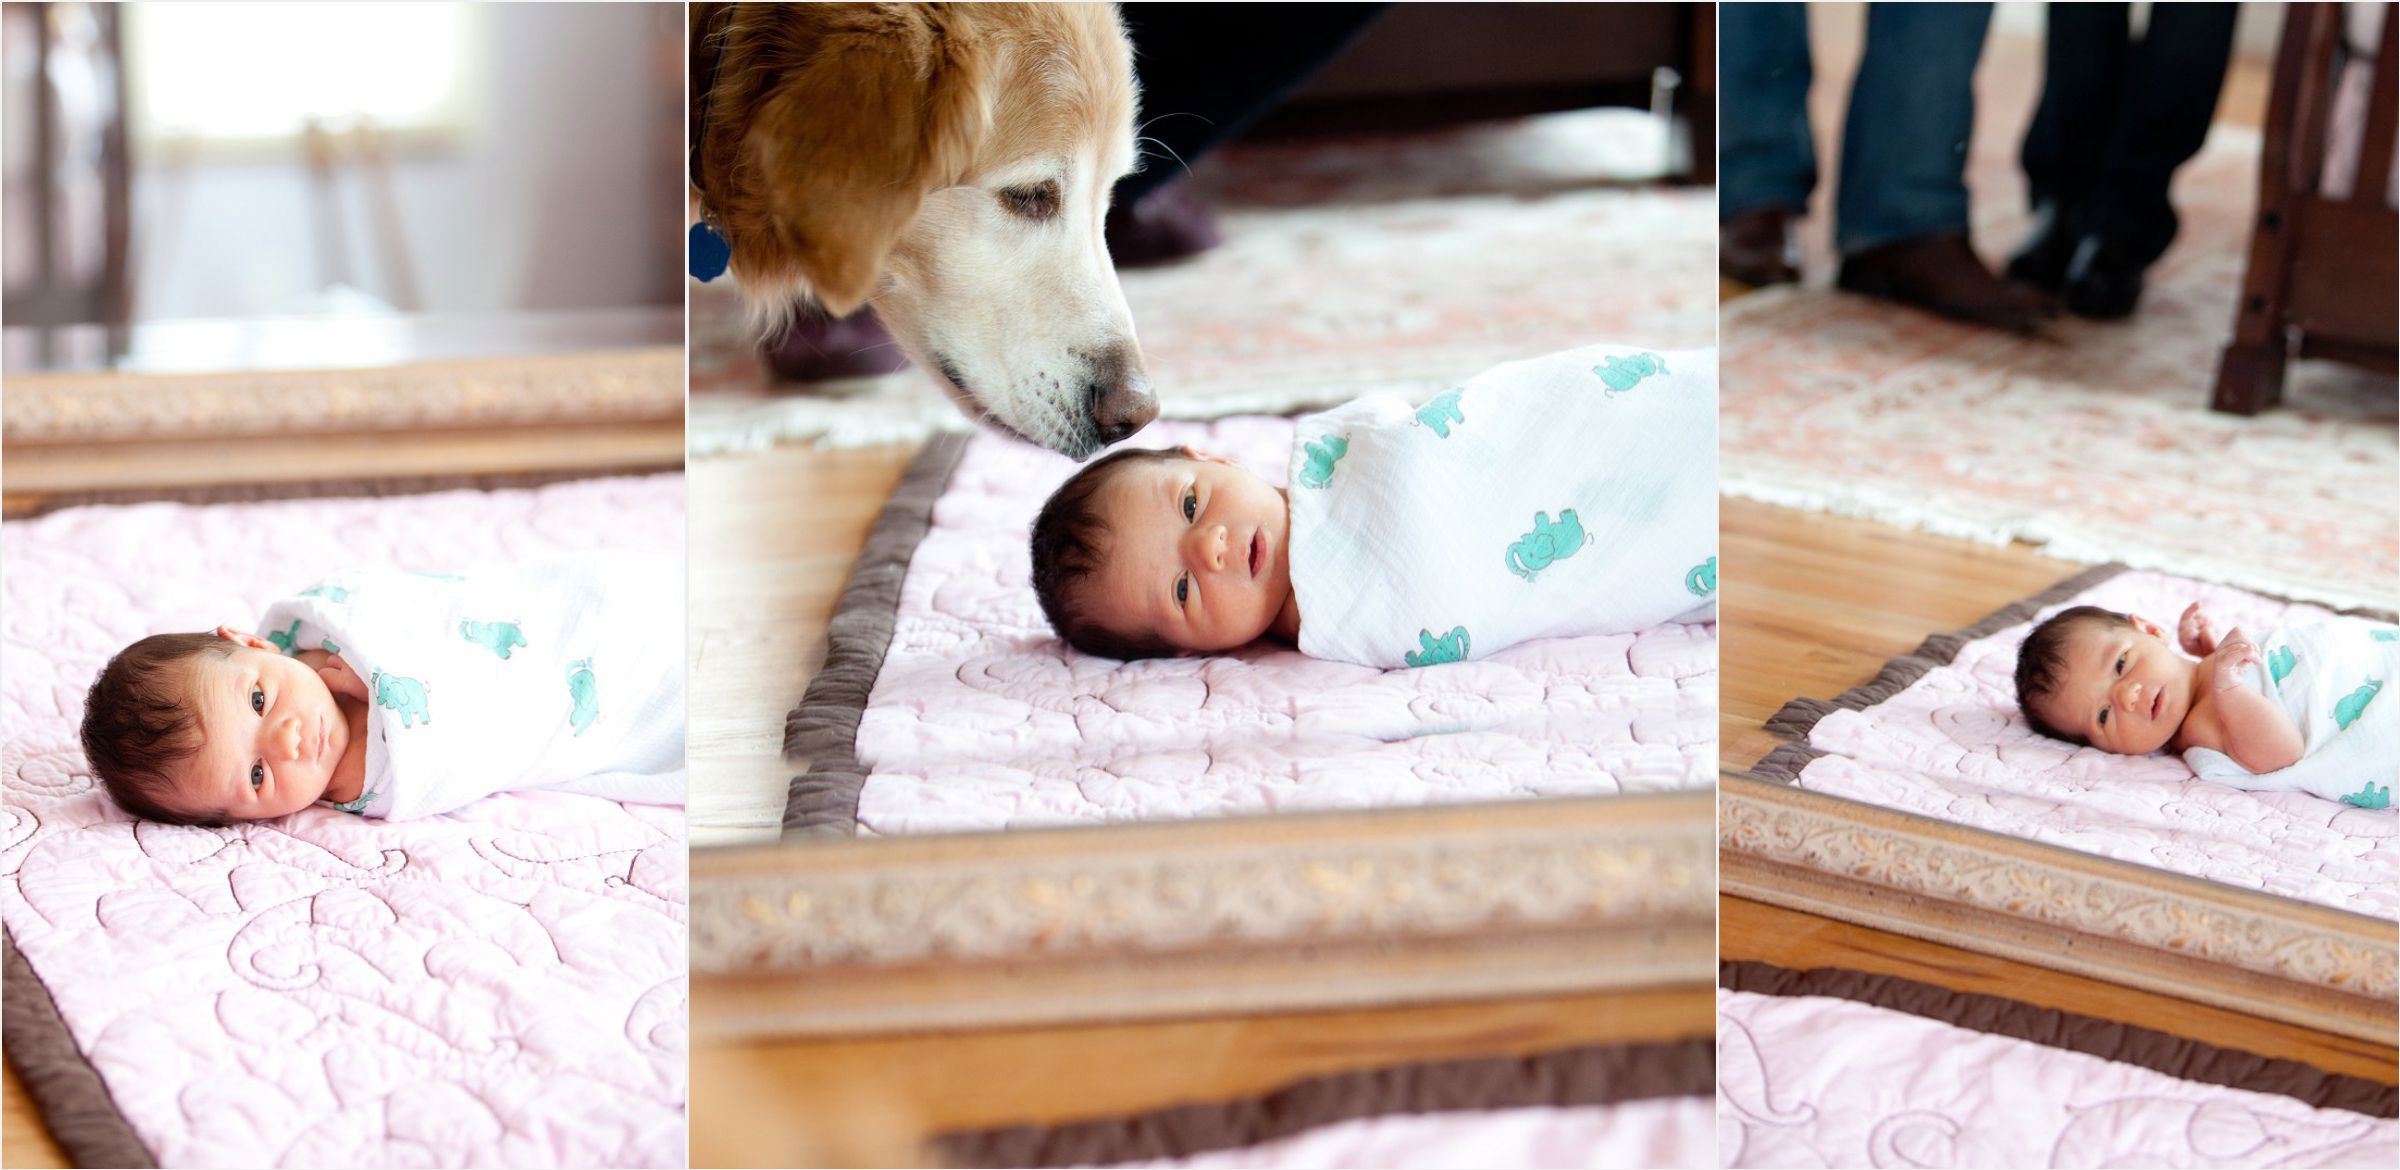 Newborn-swaddled-with-dog-in-baby-nursery-in-hilltop-denver-home-006